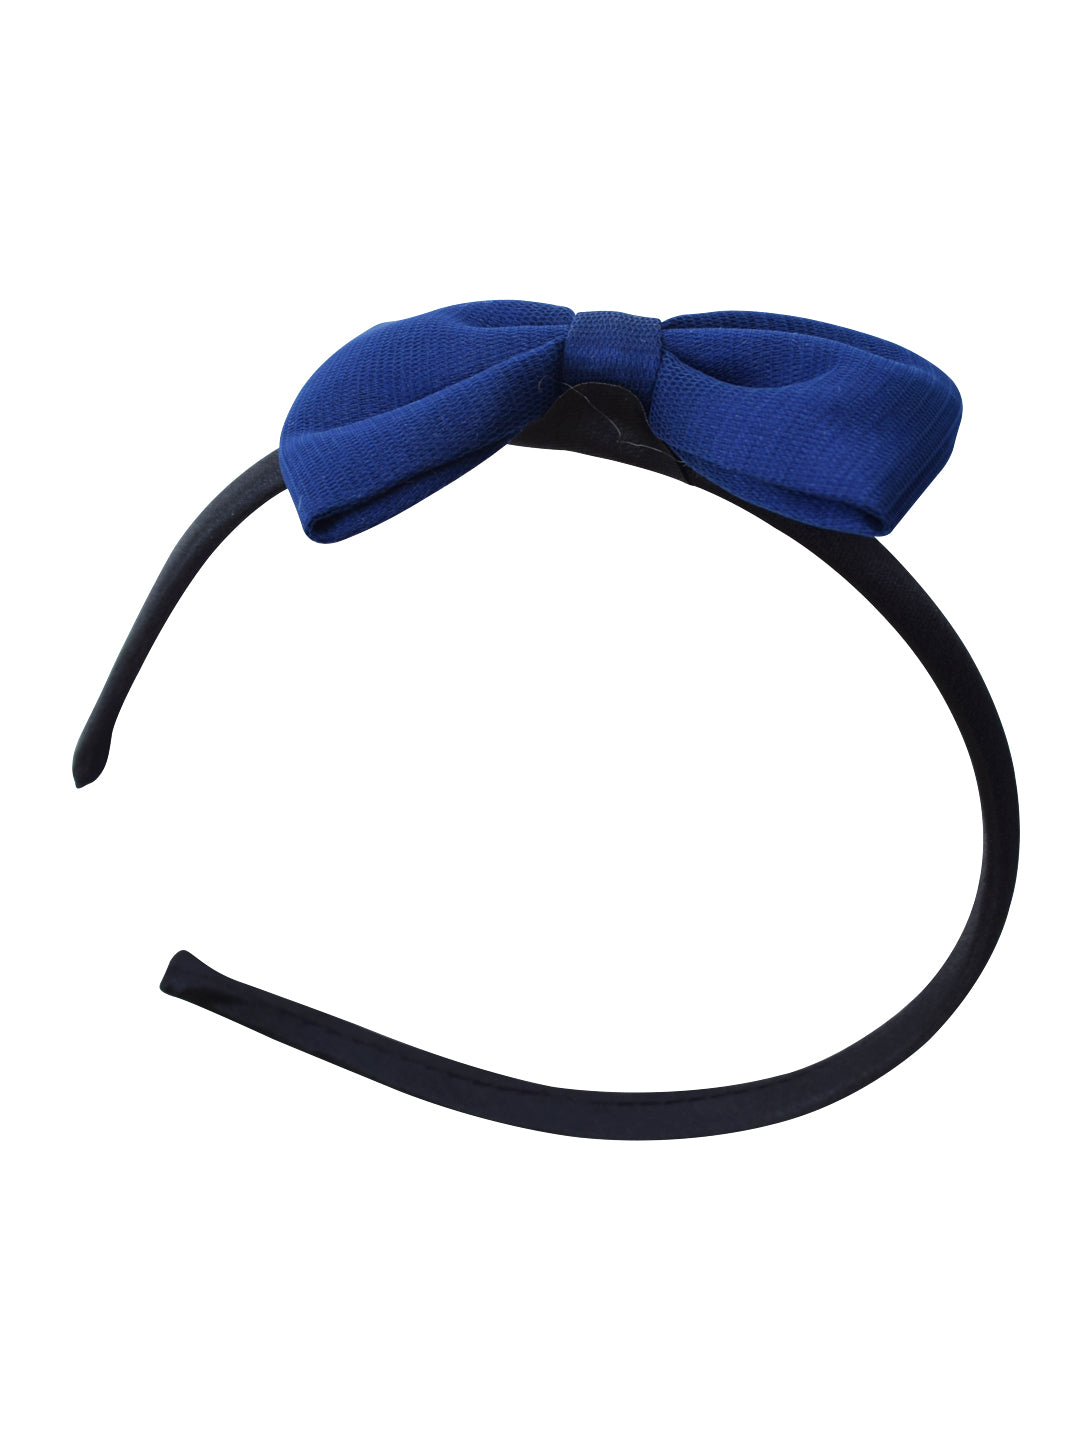 Buy Blue Hair Band with White Small Polka Dots Design  Stylish Plastic Hairband  Headband for Girls and Women Head Band Pack of 1 pc at eChoice India